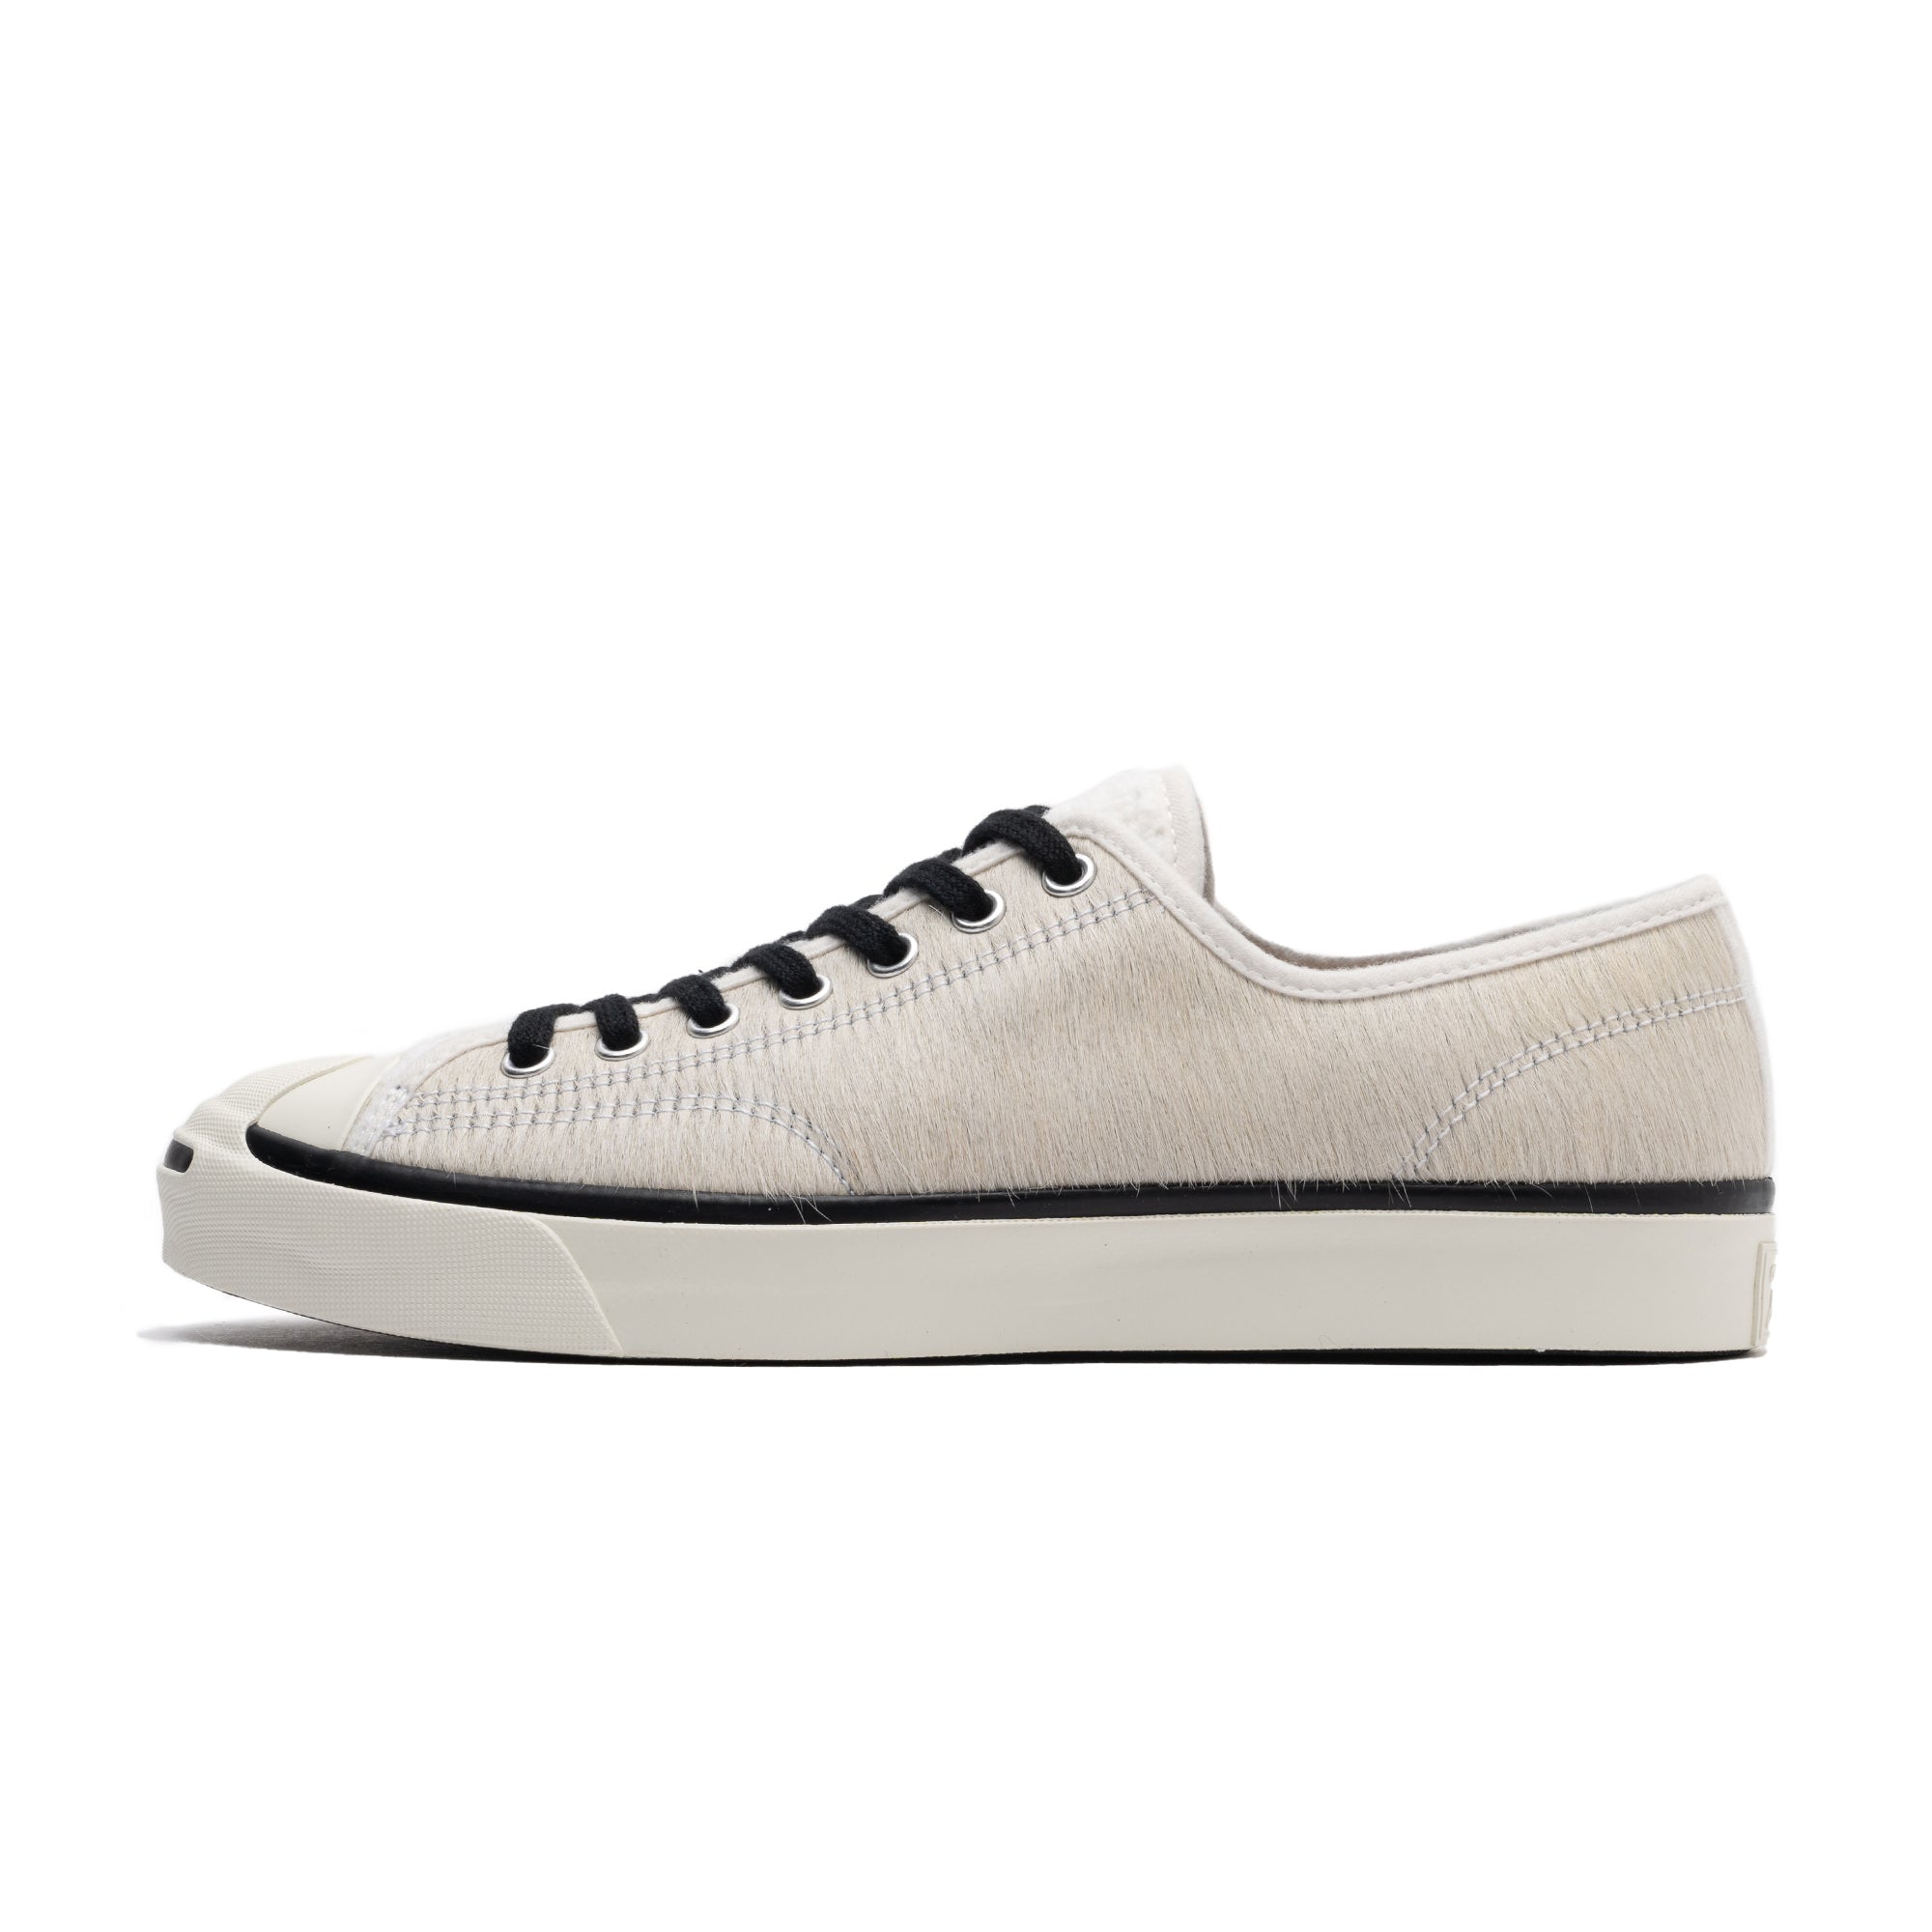 x Clot Jack Purcell OX A00322C White